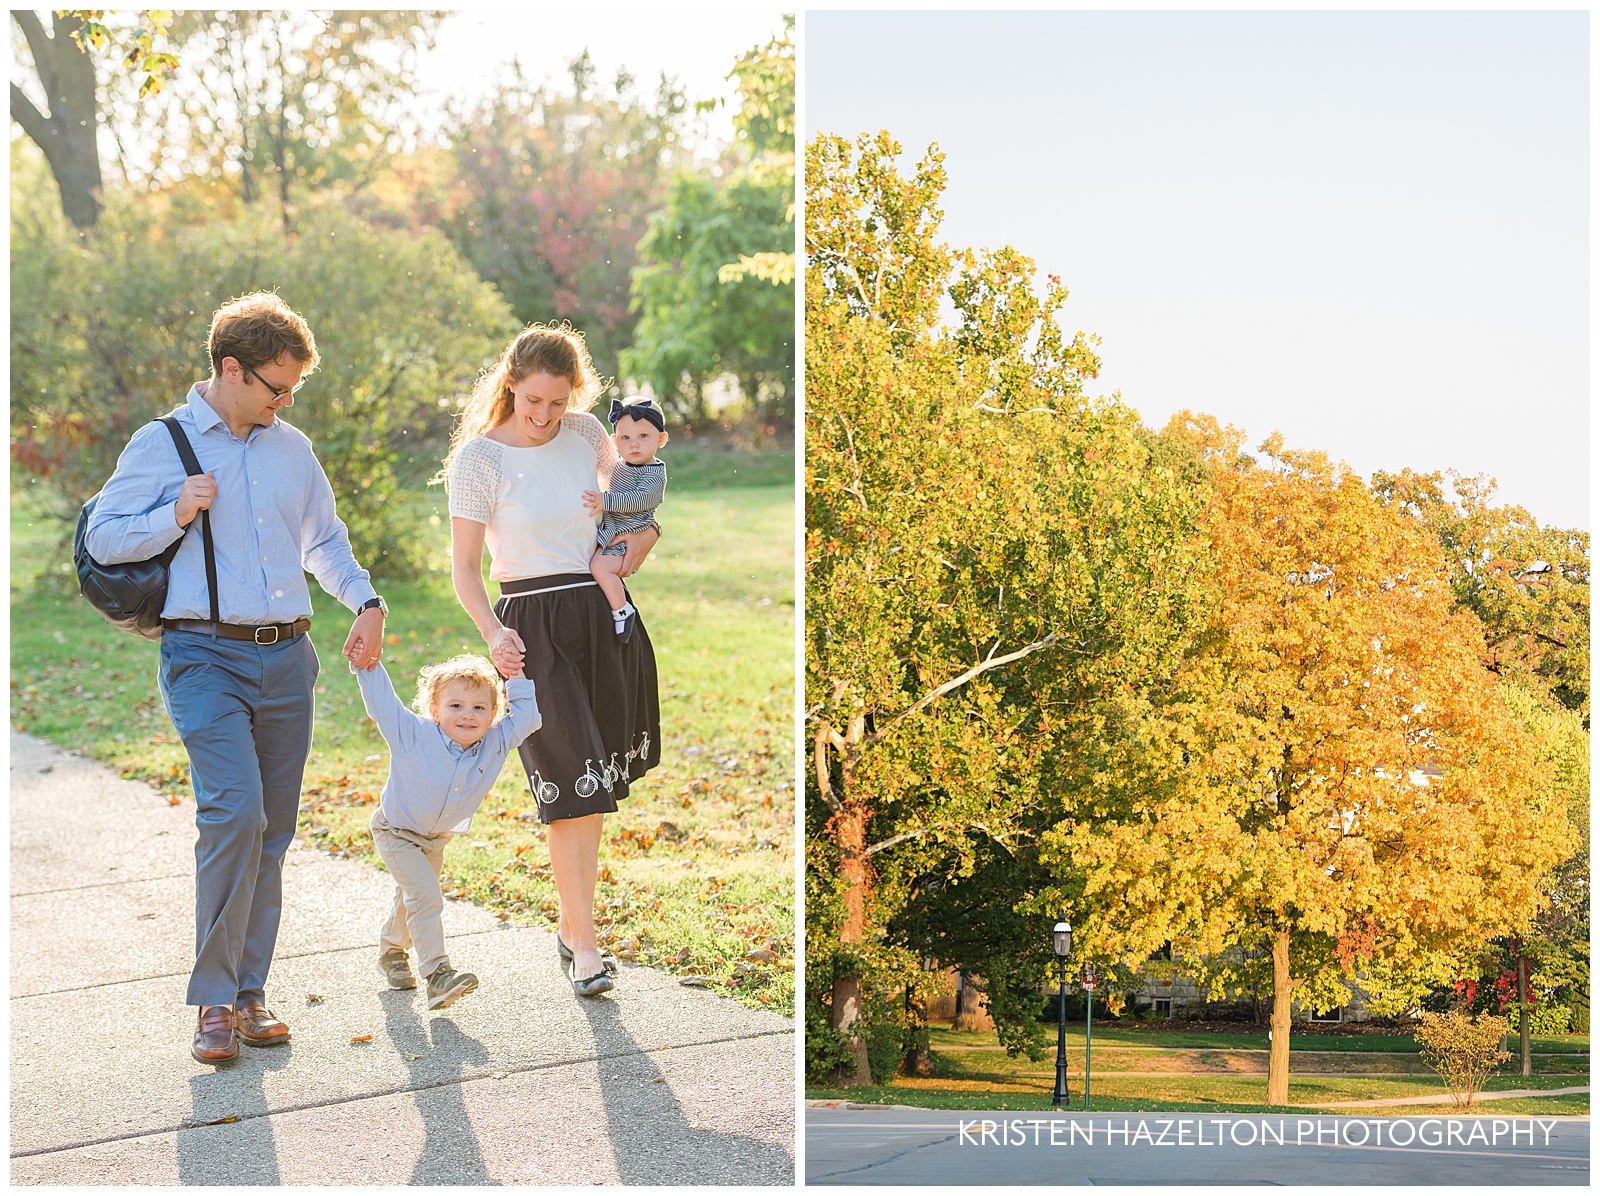 Family walking to Riverside, IL train station, and fall foliage